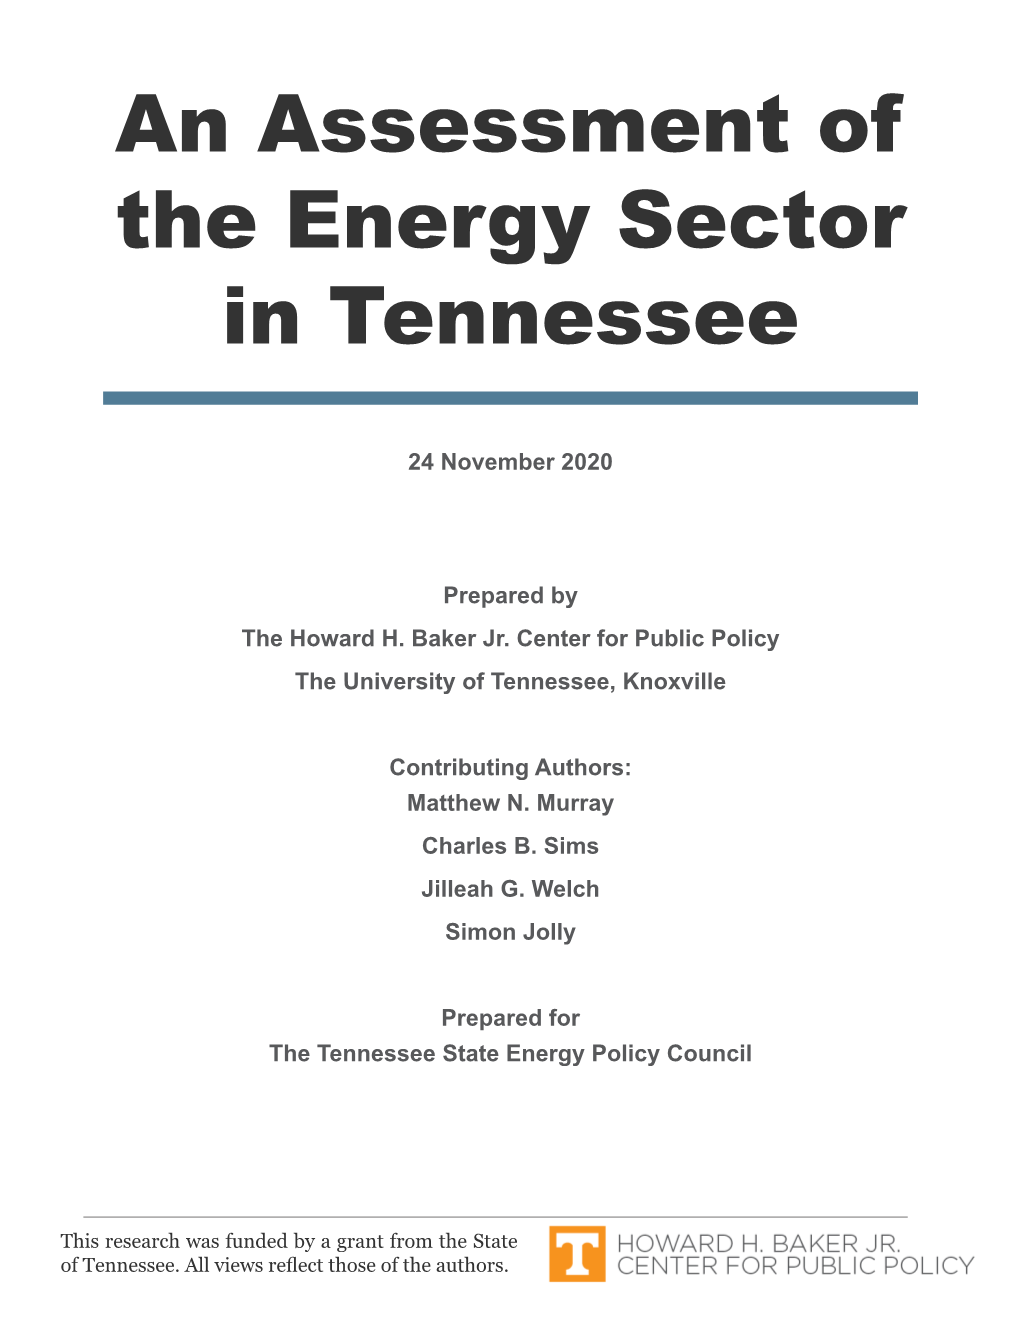 An Assessment of the Energy Sector in Tennessee